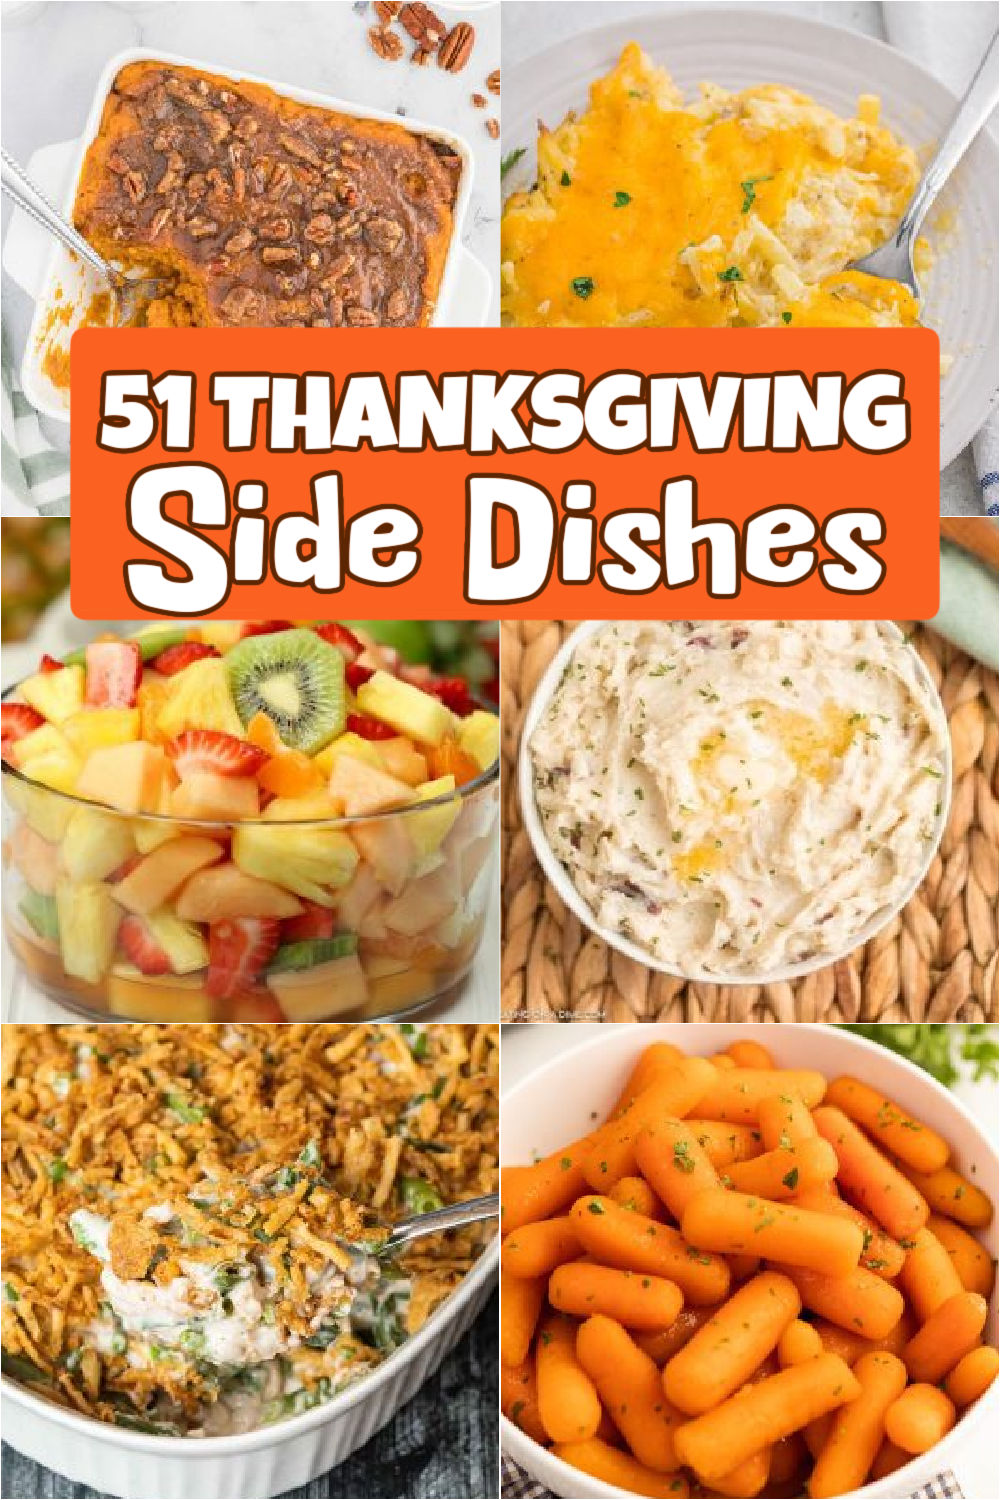 53 Easy Thanksgiving Side Dishes - Best Thanksgiving Sides